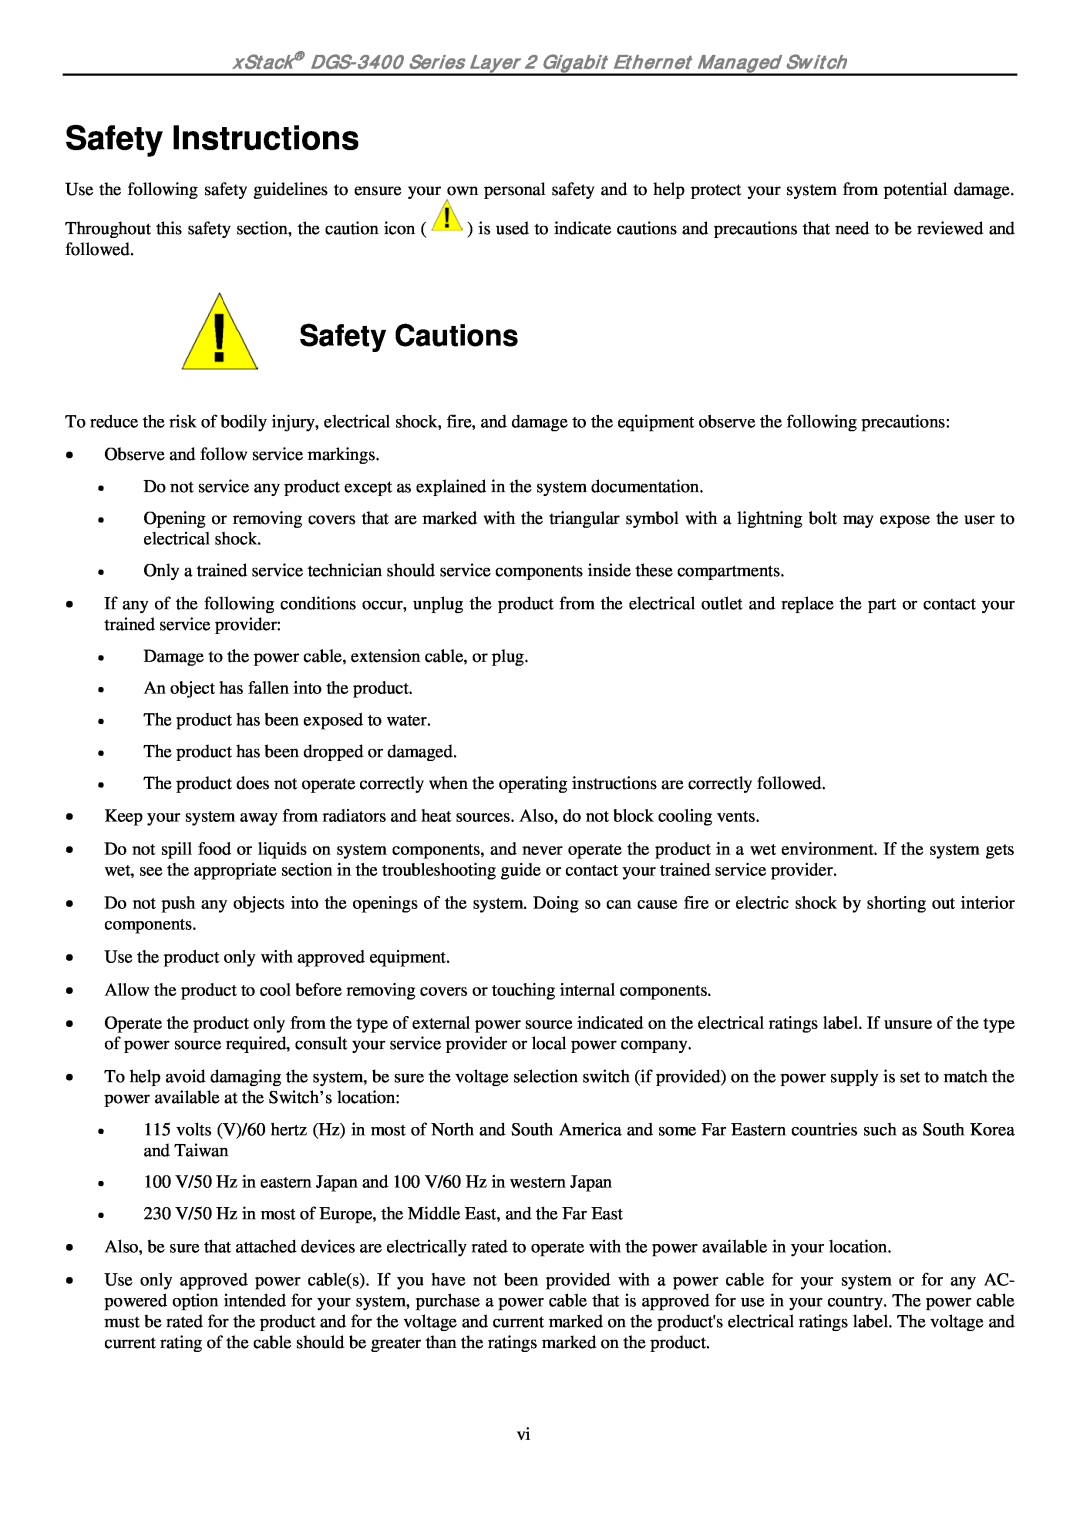 D-Link ethernet managed switch manual Safety Instructions, Safety Cautions 